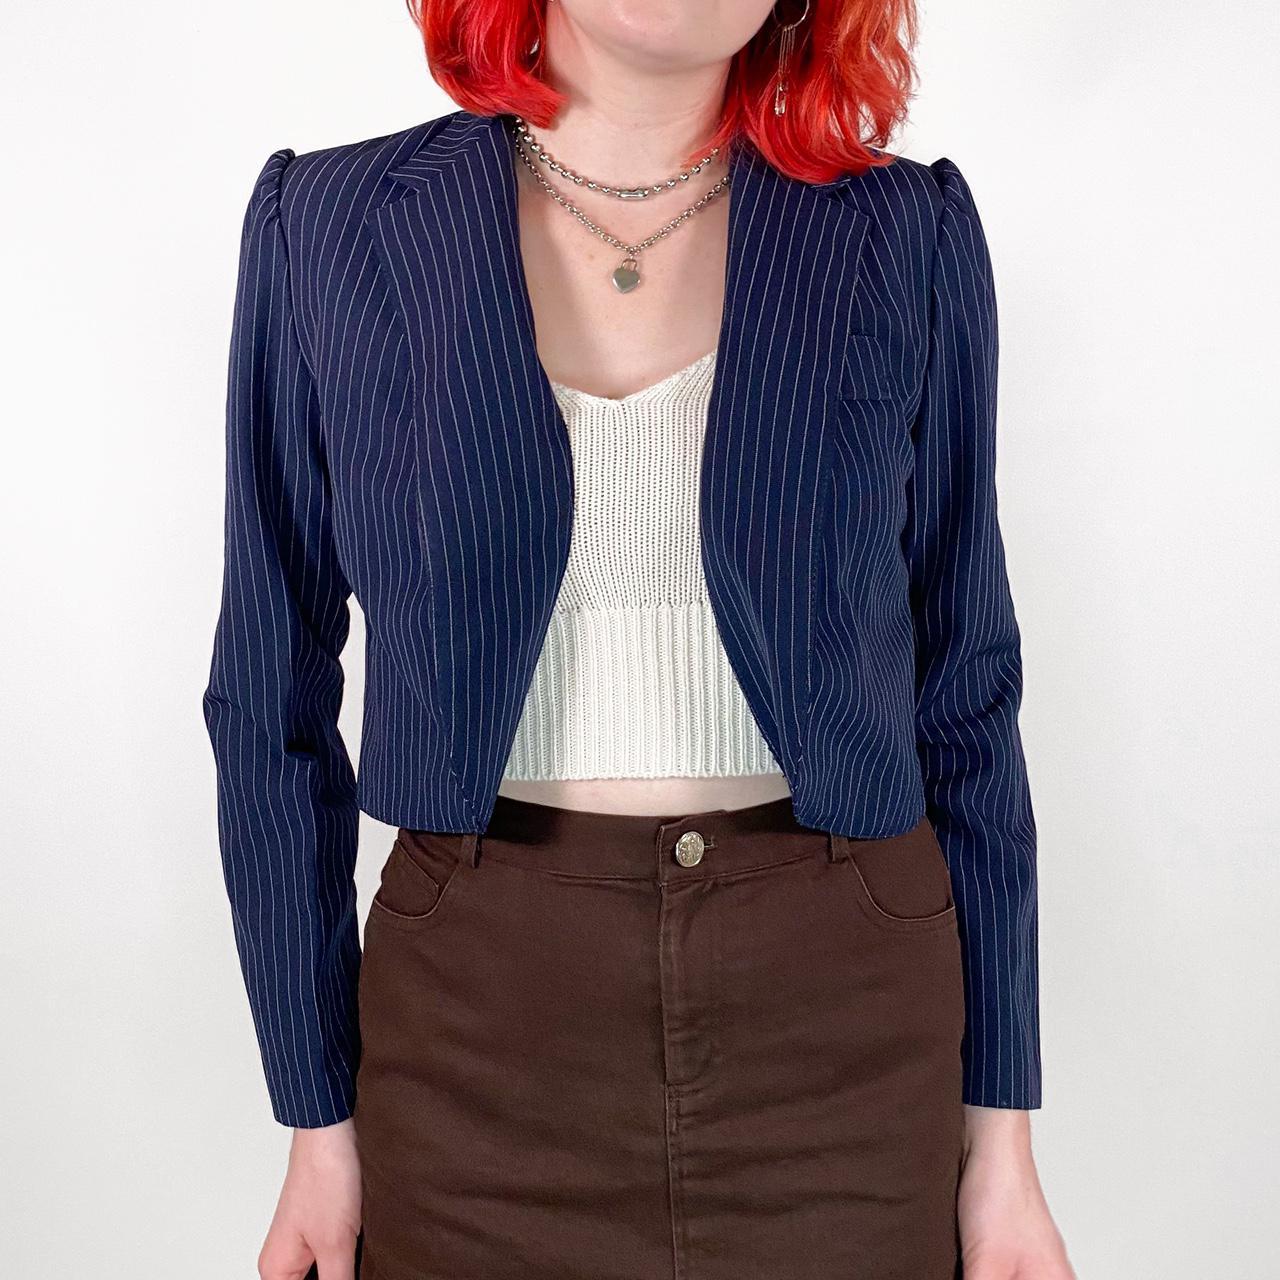 Product Image 3 - Cropped navy pinstripe blazer 🧷

Fits